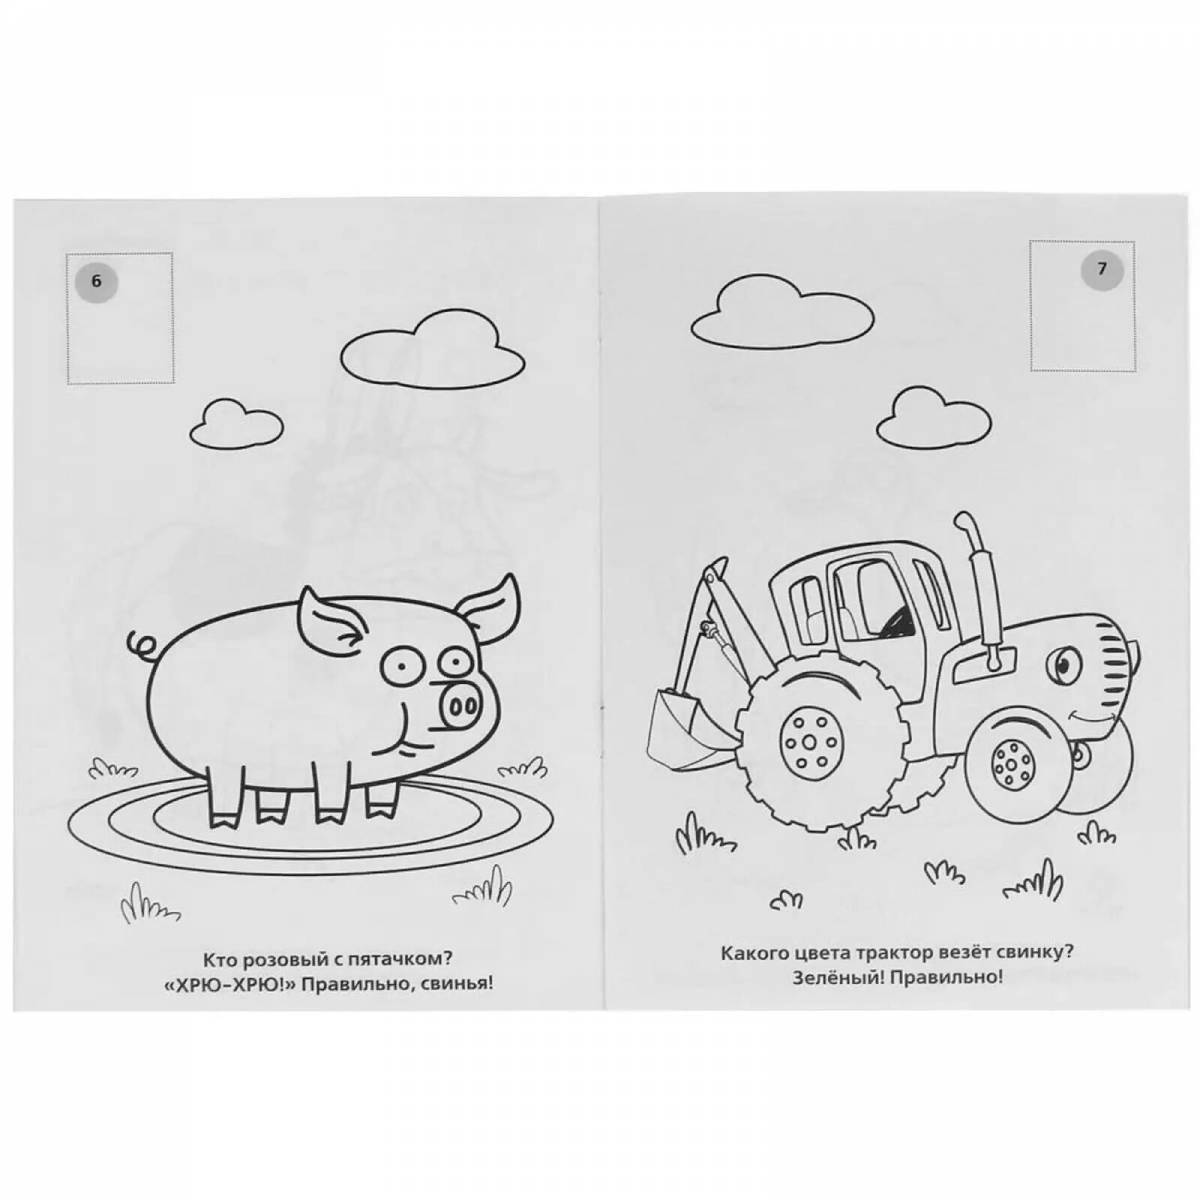 Classic blue tractor coloring book